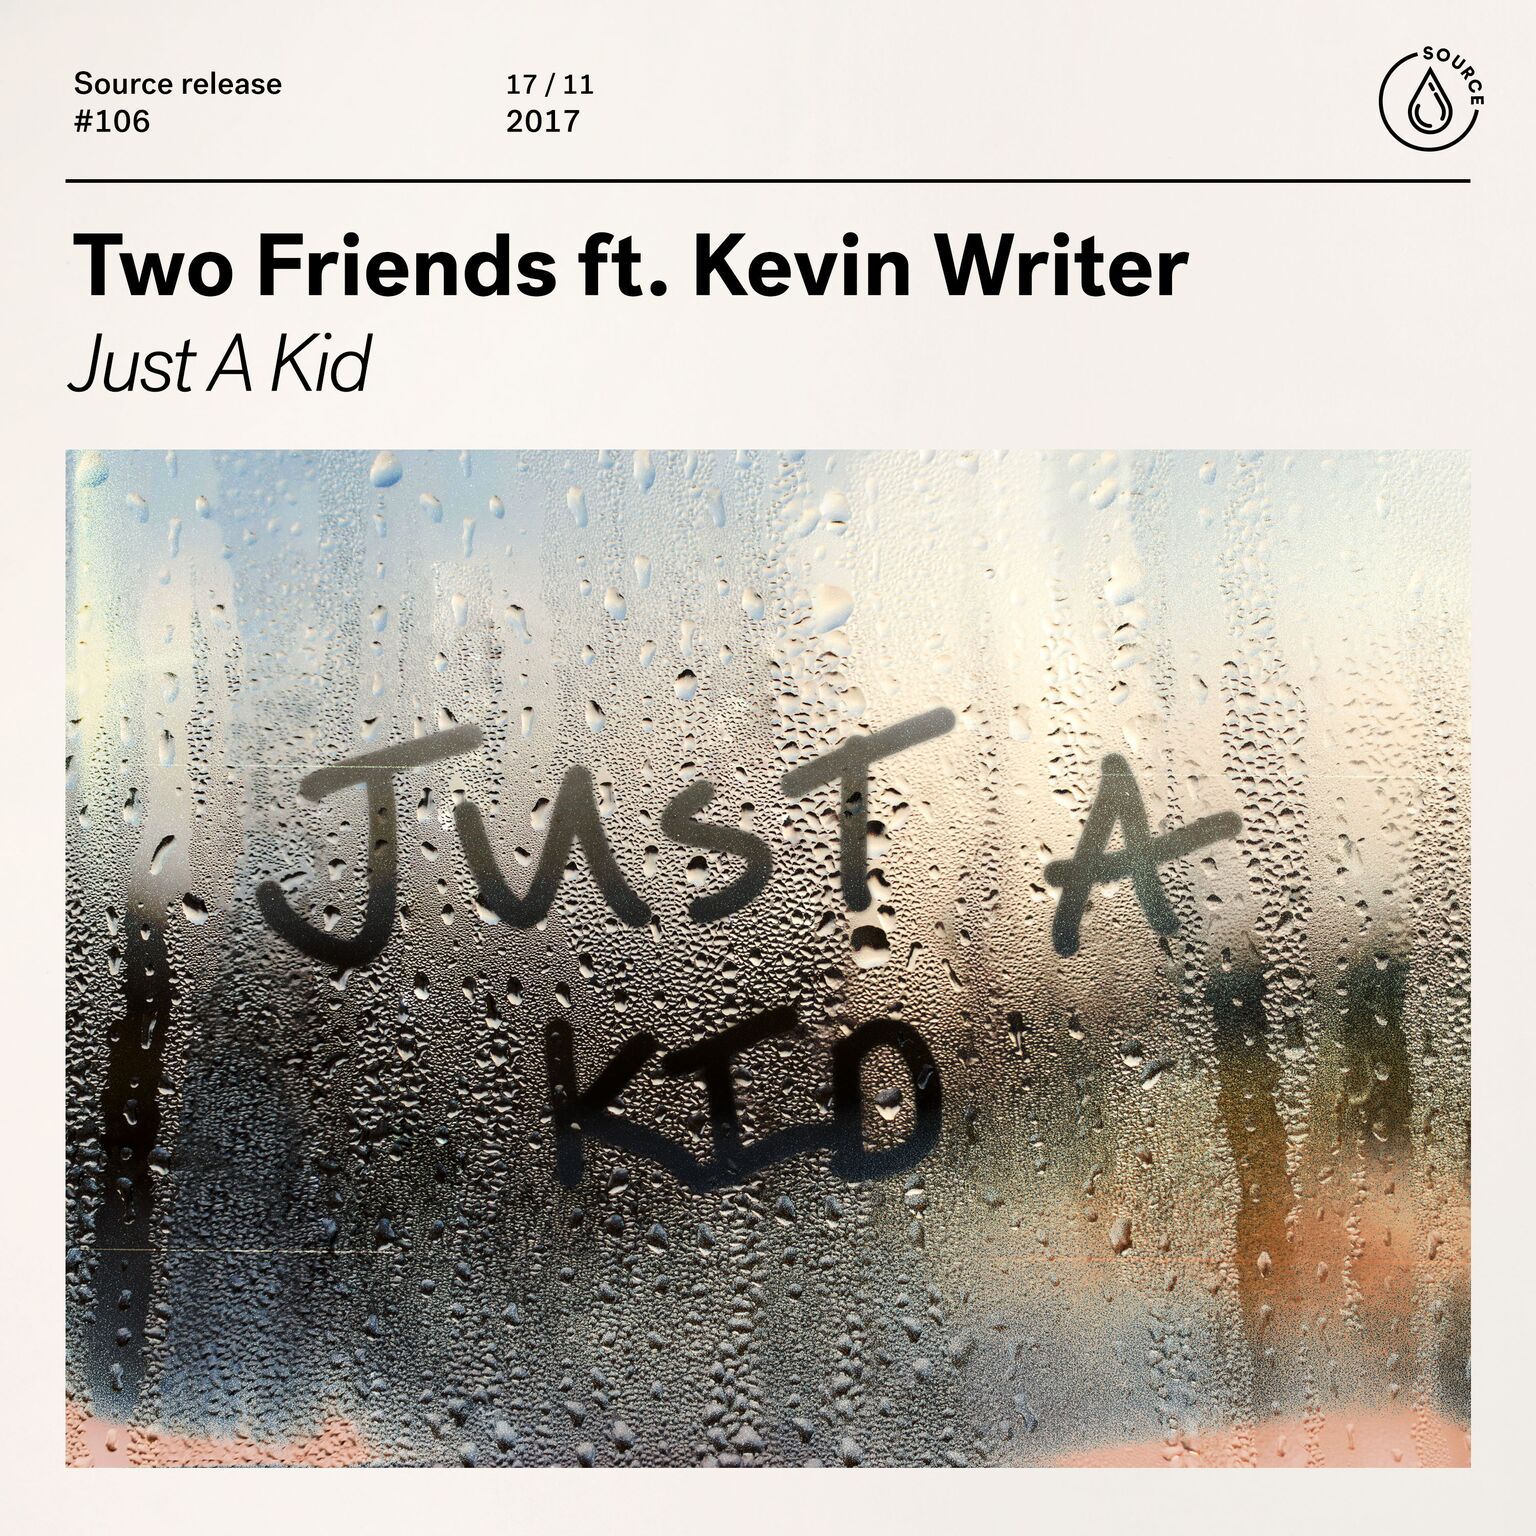 TWO FRIENDS RELEASE CHARITY SINGLE ‘JUST A KID’